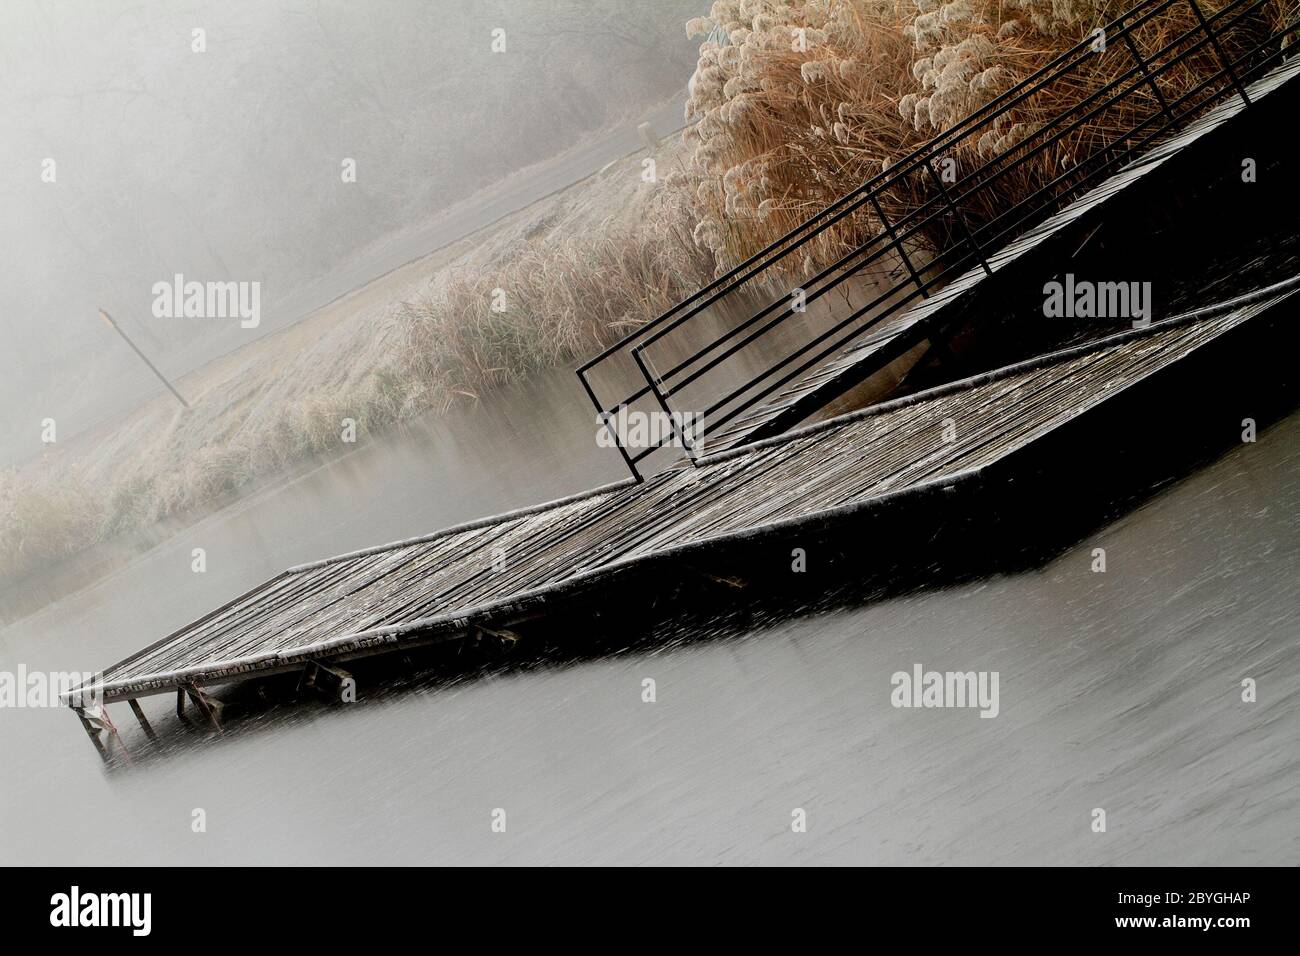 Wooden dock in a lake. Photo taken in a misty day Stock Photo